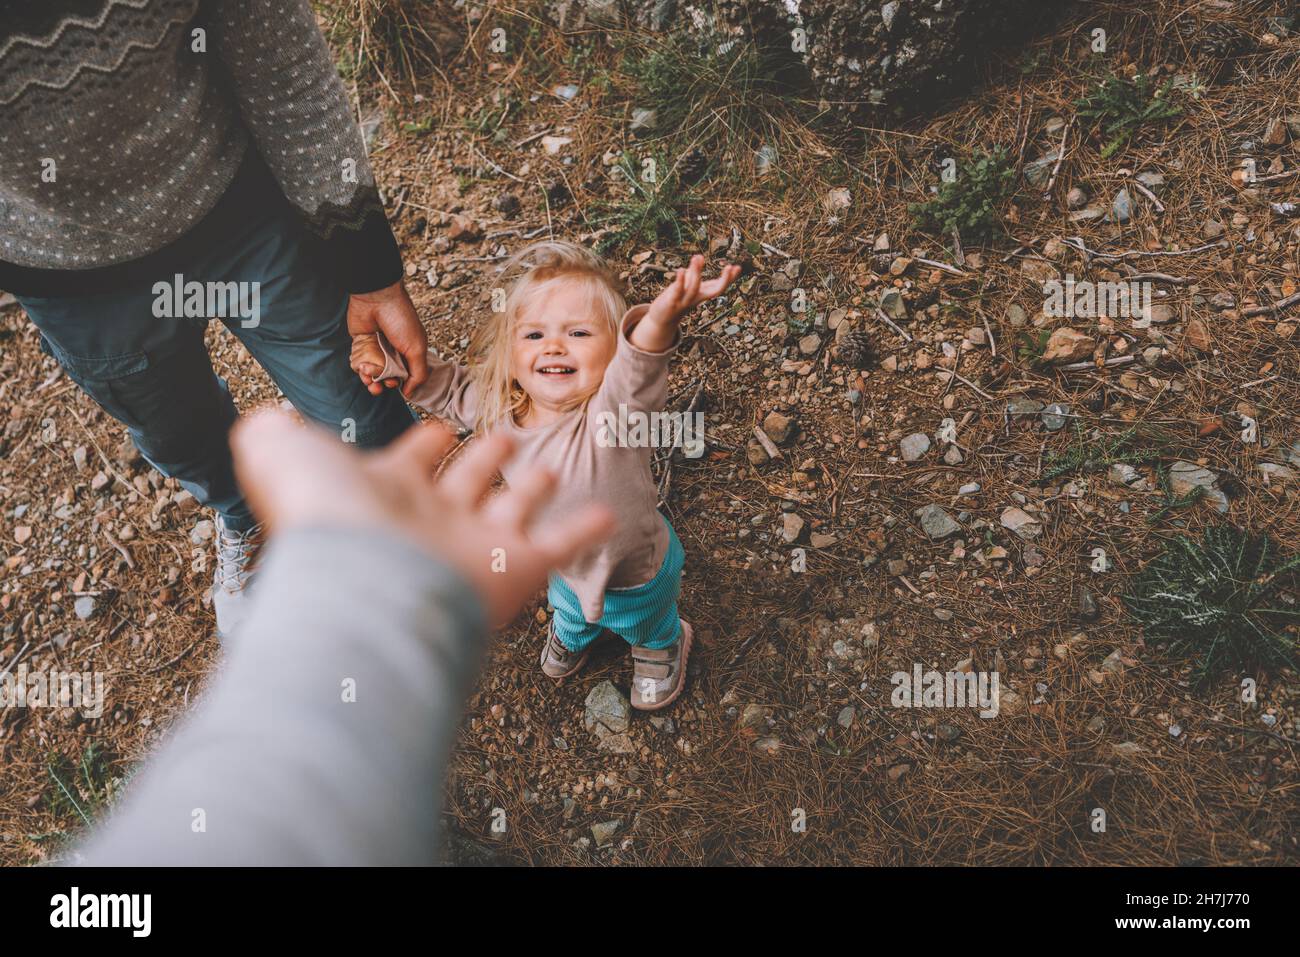 Family child with father and mother walking outdoor holding hands vacations together Stock Photo